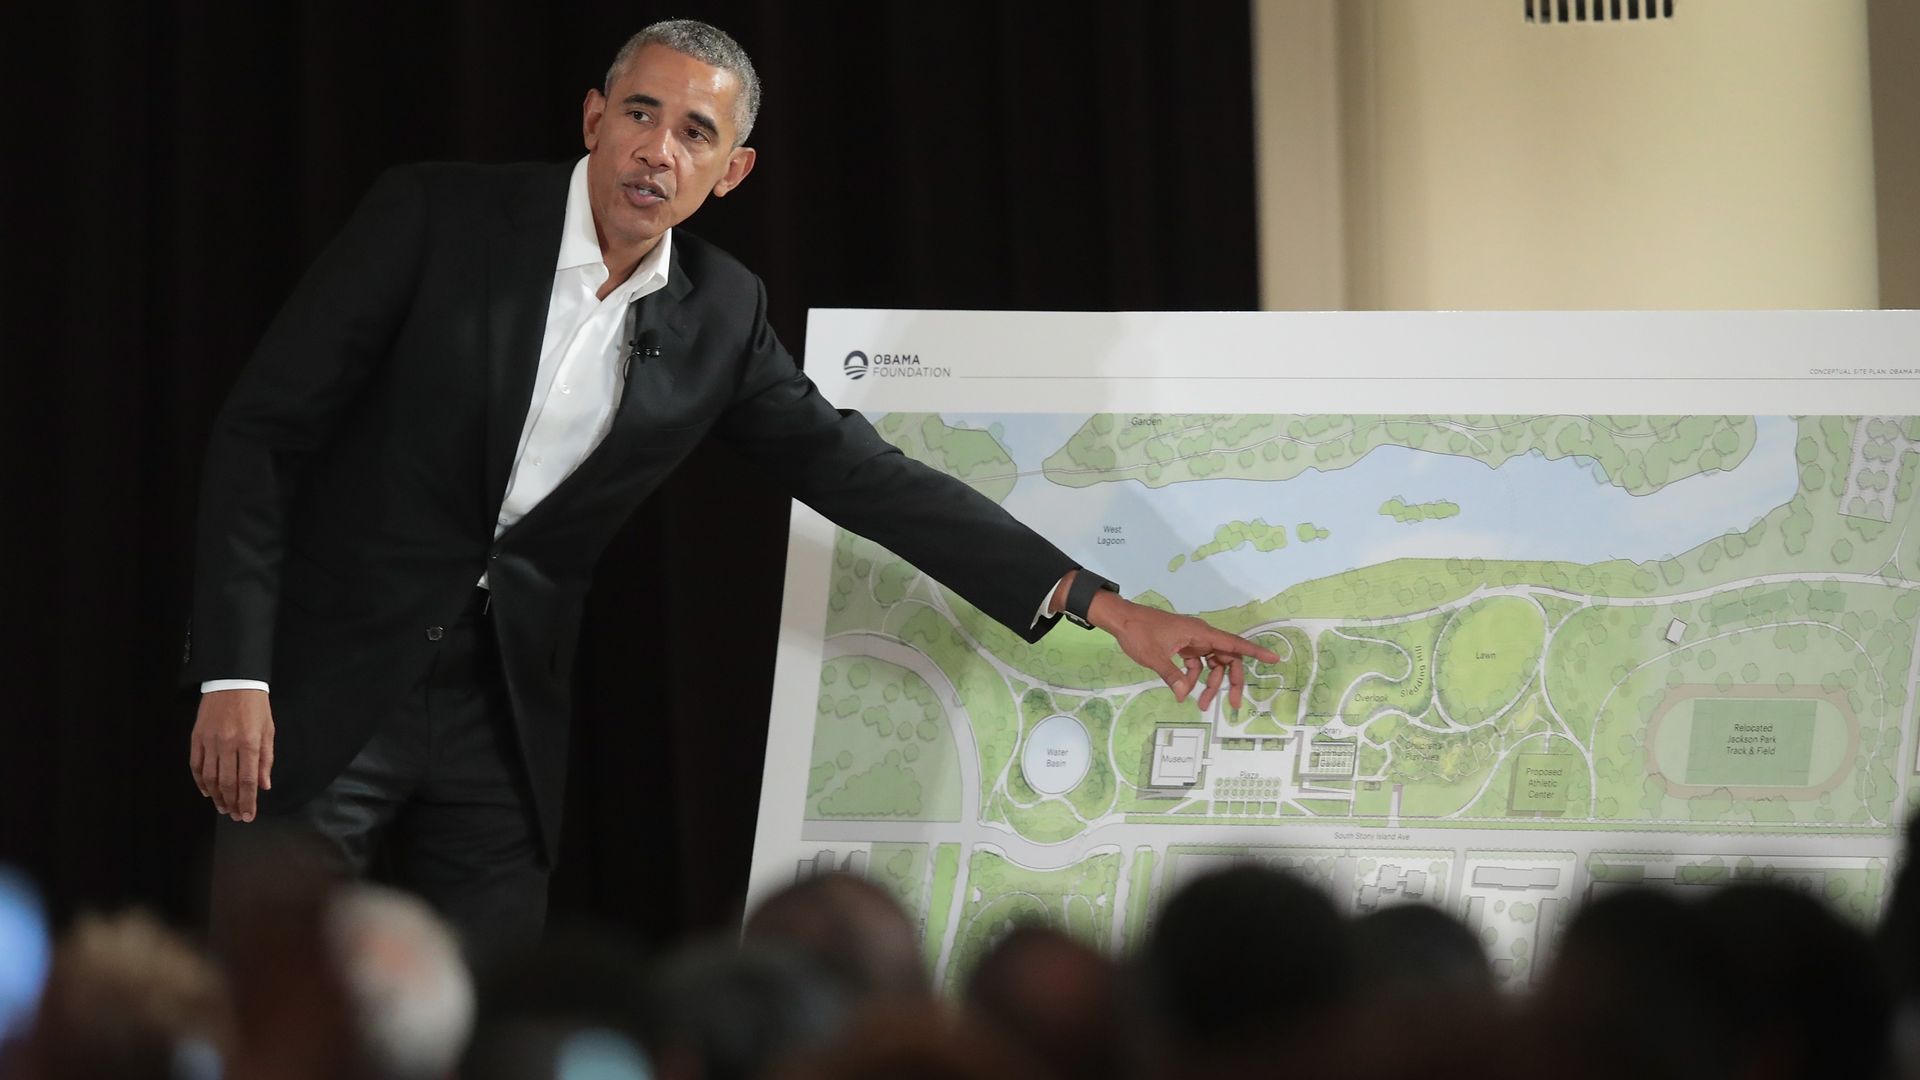 Former President Obama points out features of the proposed Obama Presidential Center during a gathering at the South Shore Cultural Center on May 3, 2017.